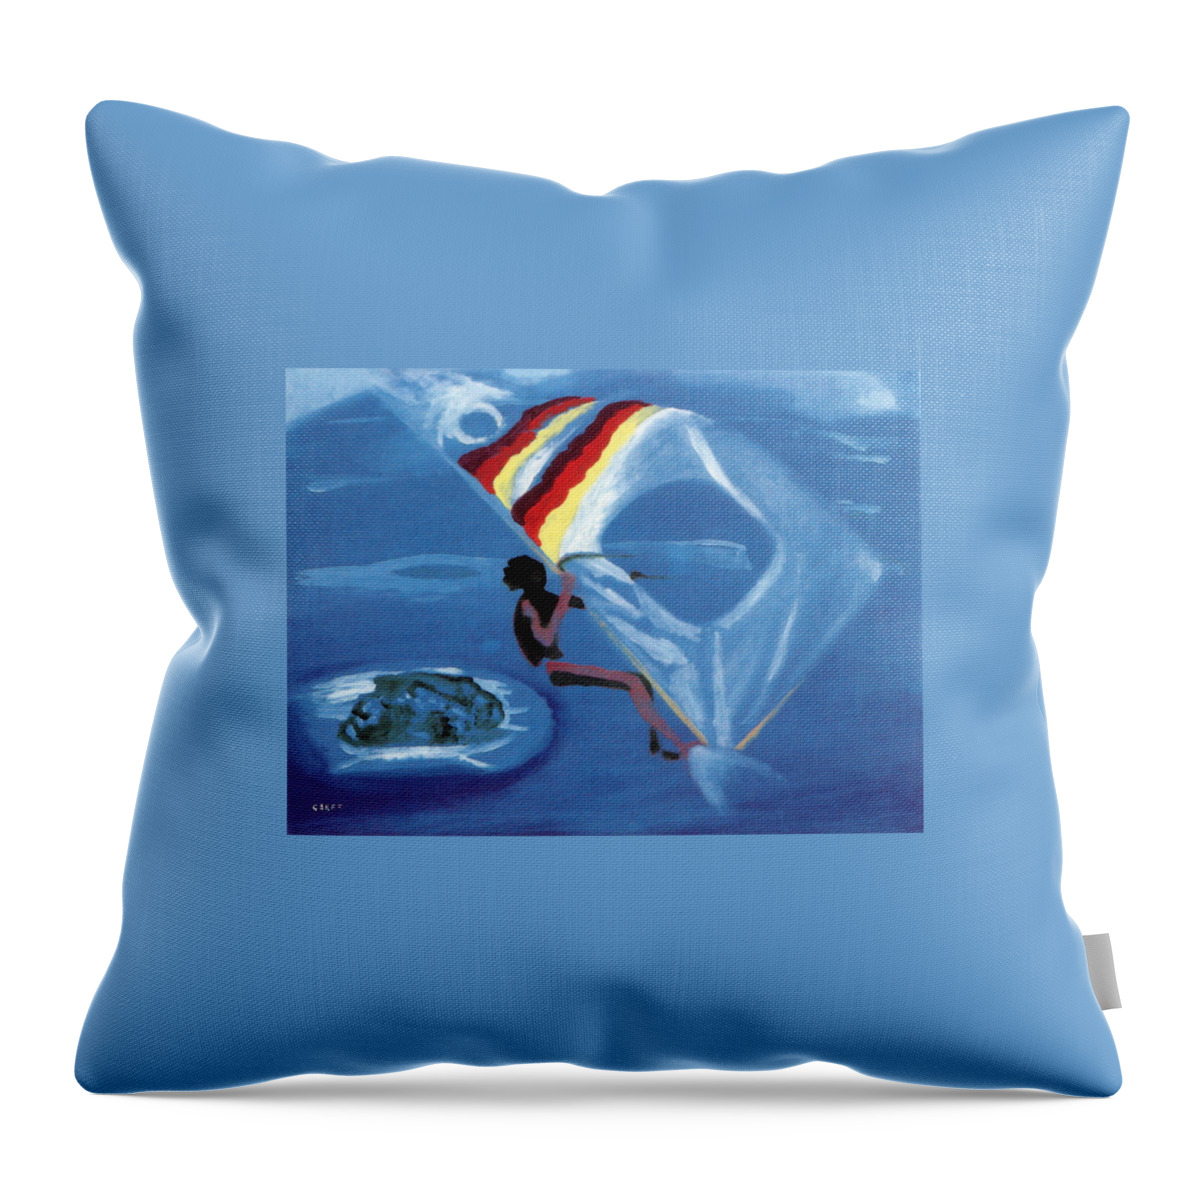 Windsurfer Throw Pillow featuring the painting Flying Windsurfer by Enrico Garff